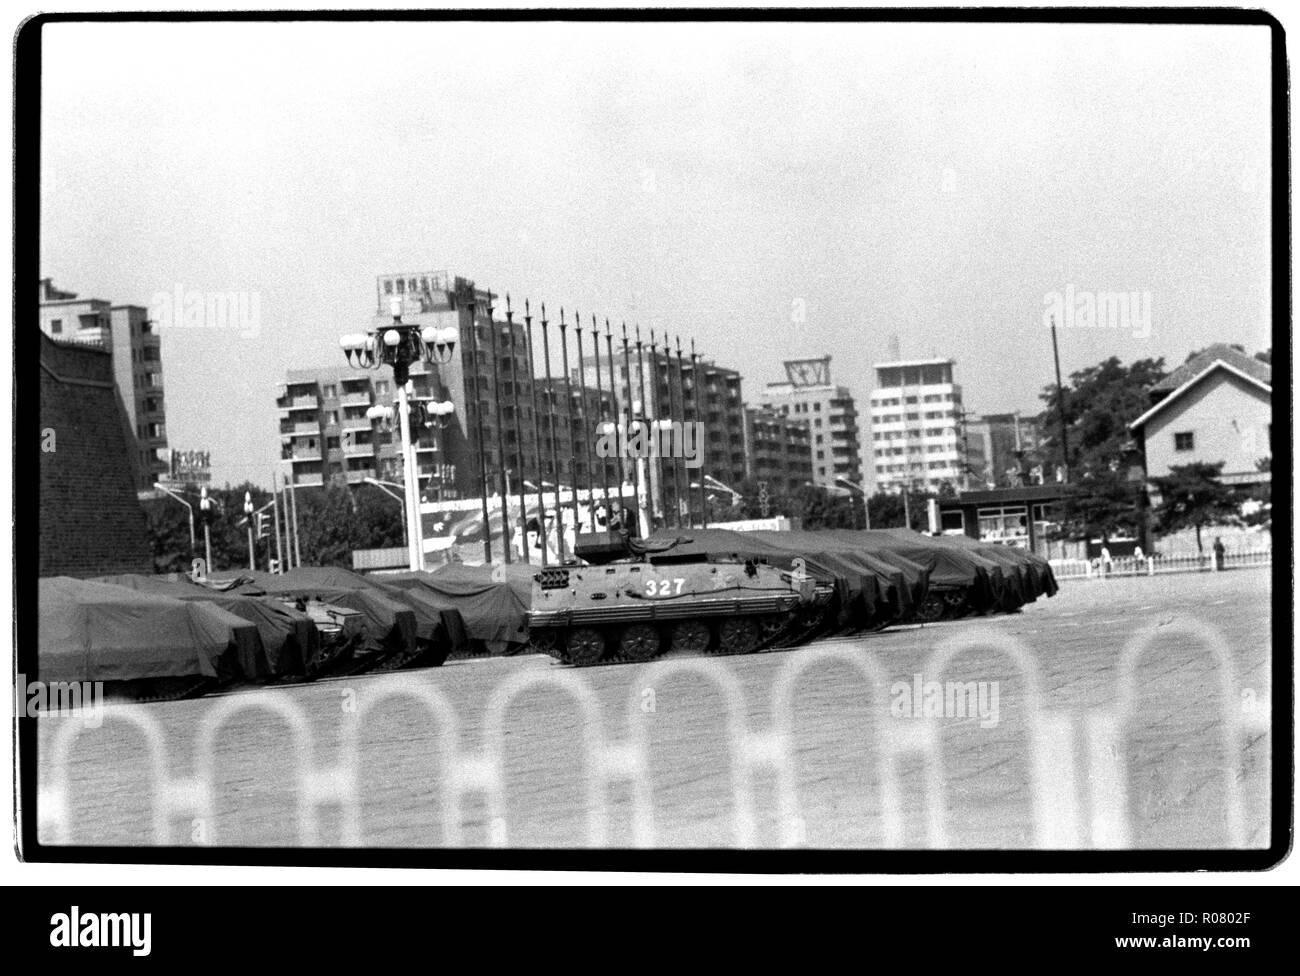 China Beijing in 1989. Chinese army troops occupy positions on Tiananmen Square in the centre of Beijing a week after the massacre of student protesters in June 1989 Photographs of Chinese army and security personel gurding the area in and around Tiananmen Square, taken secretly from inside a blacked out taxi as photographers were under threat of being arrested if they worked openly in the area around Tiananmen Square after the massacre. APC, Armoured Personel Carriers near the square. Wikipeadia: The Tiananmen Square protests of 1989, commonly known in mainland China as the June Fourth Incide Stock Photo